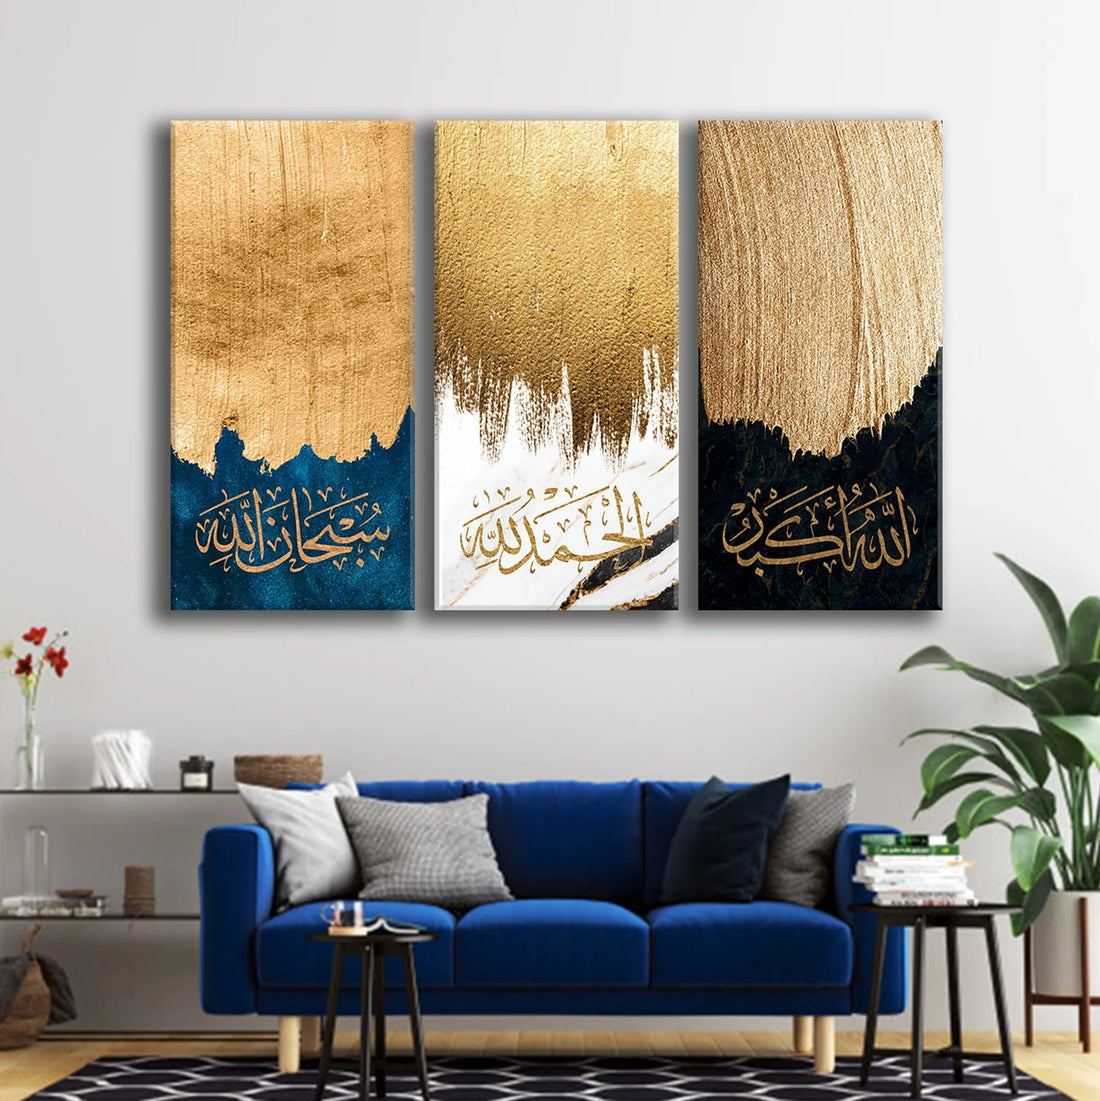 Trends and Traditions: The Evolving World of Modern Islamic Wall Art